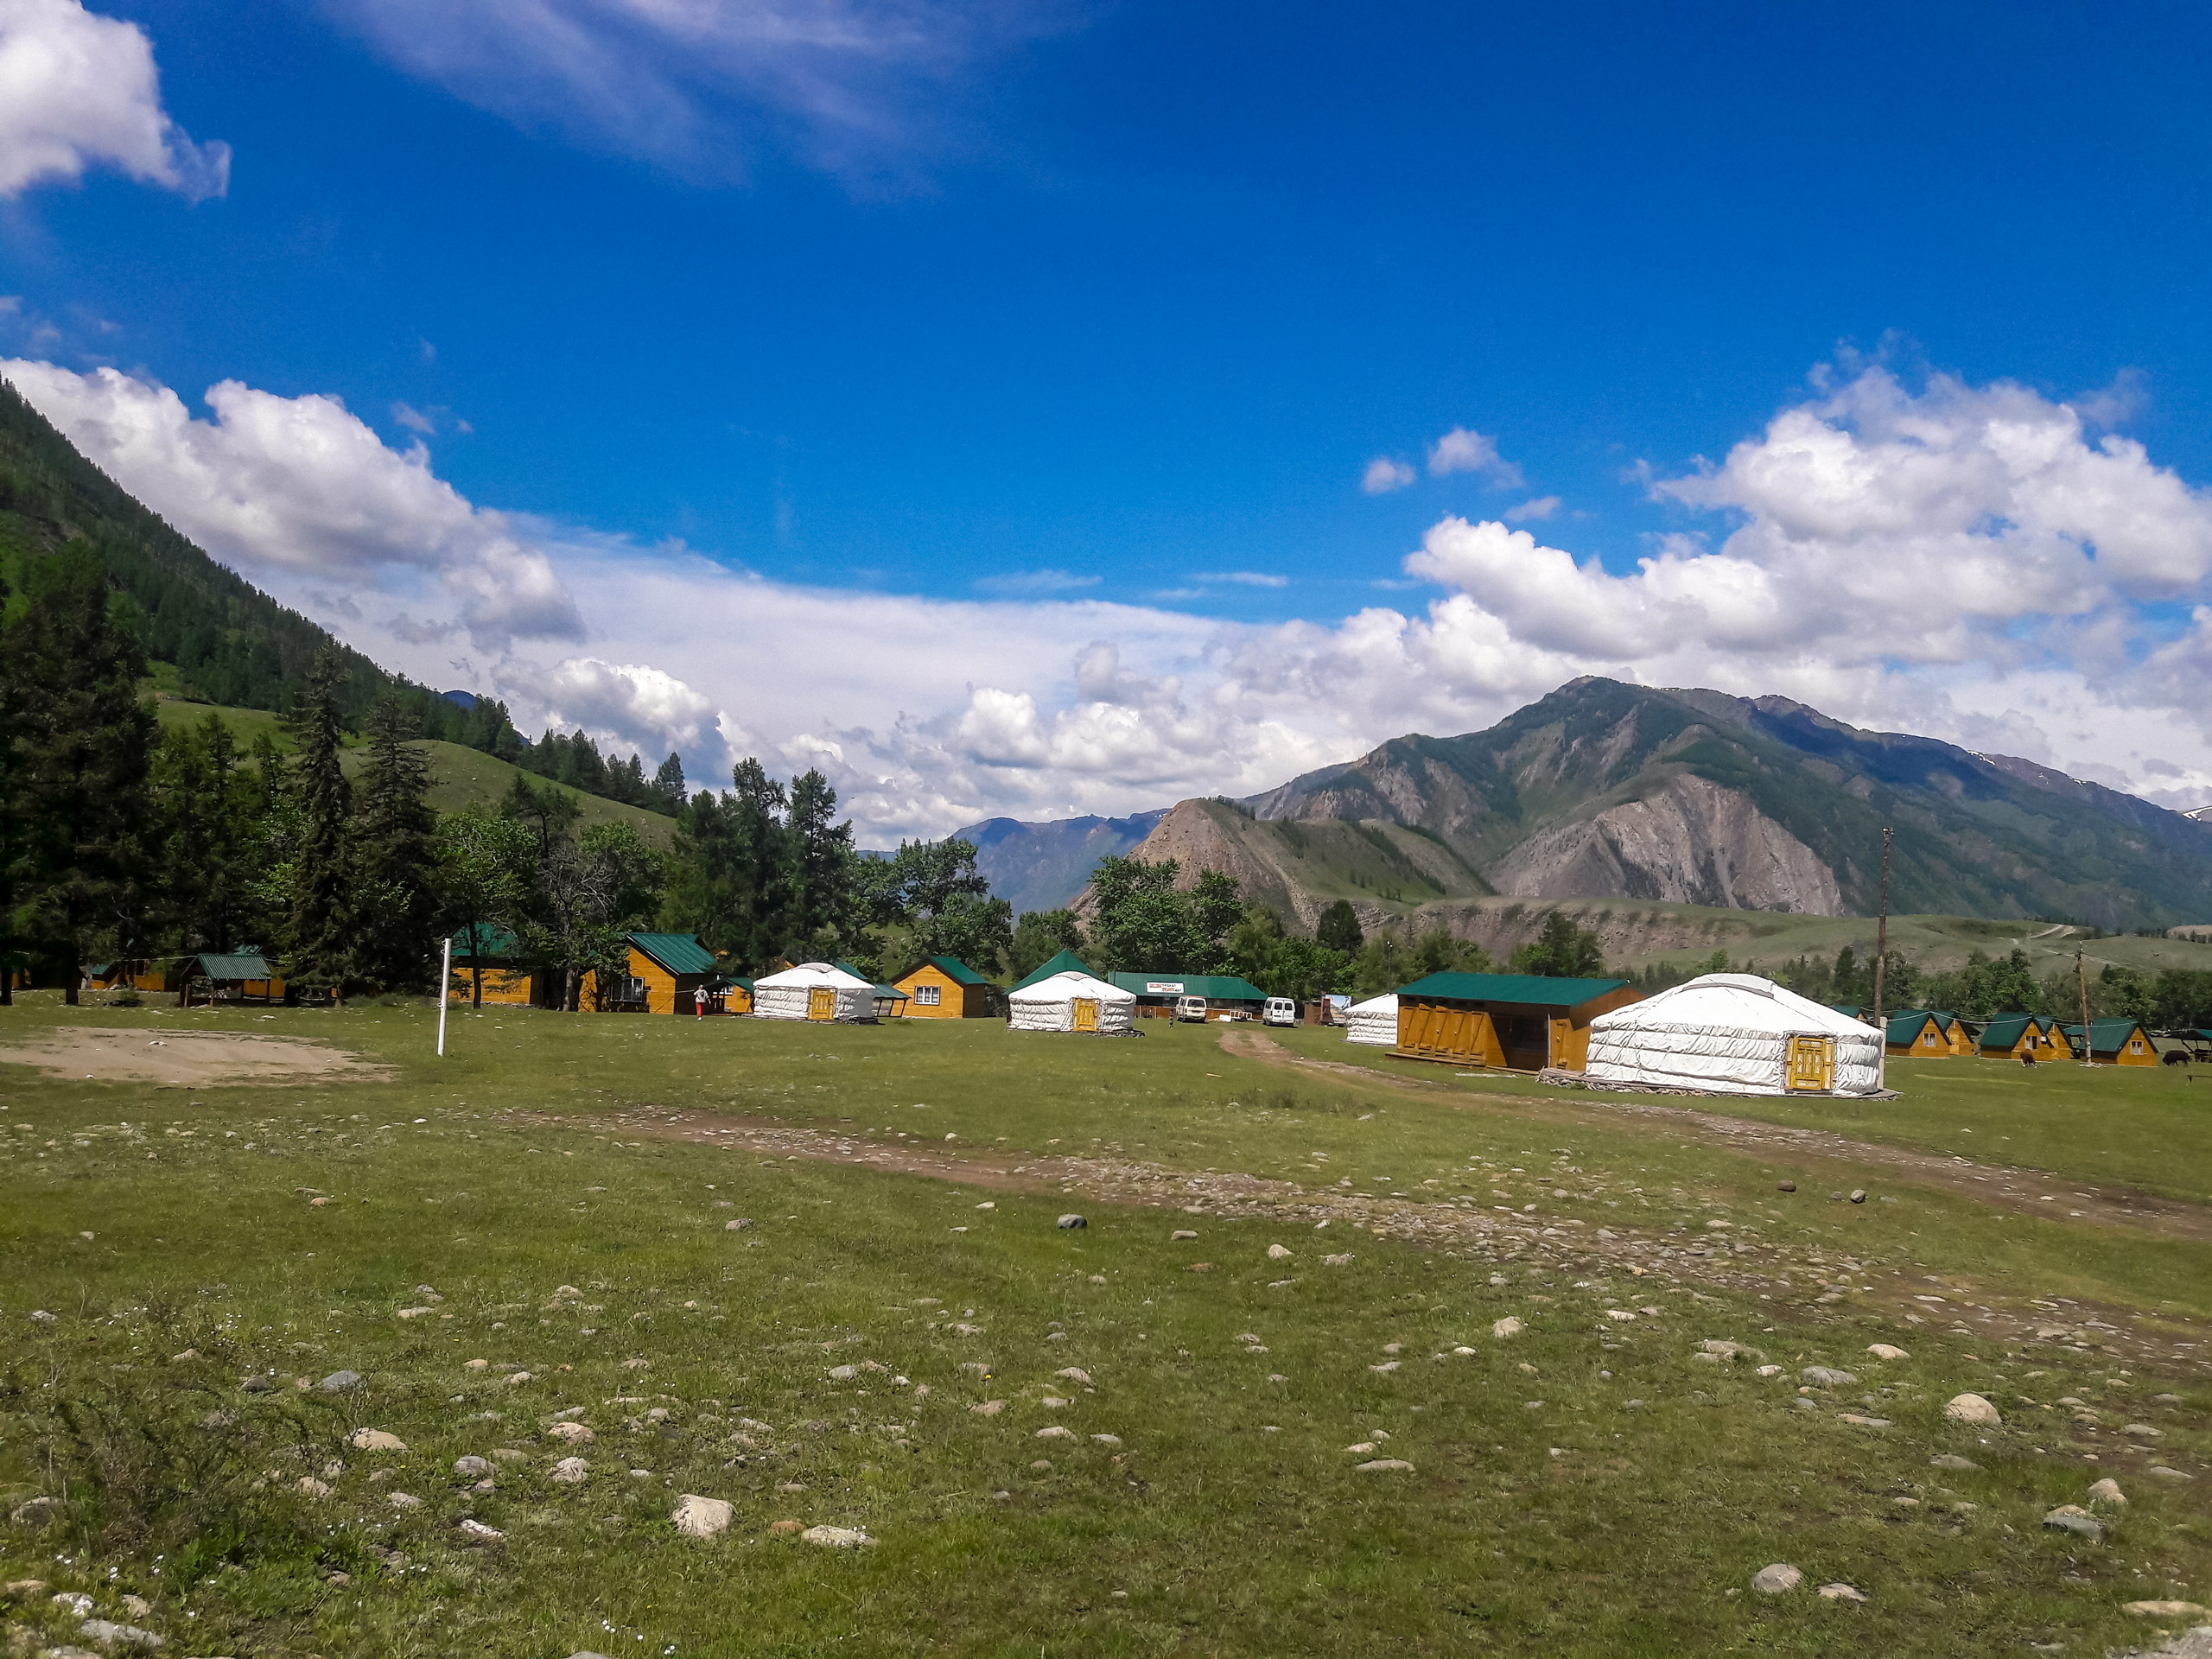 Basecamp of cabins and yurts in the valley Altai mountains Russia